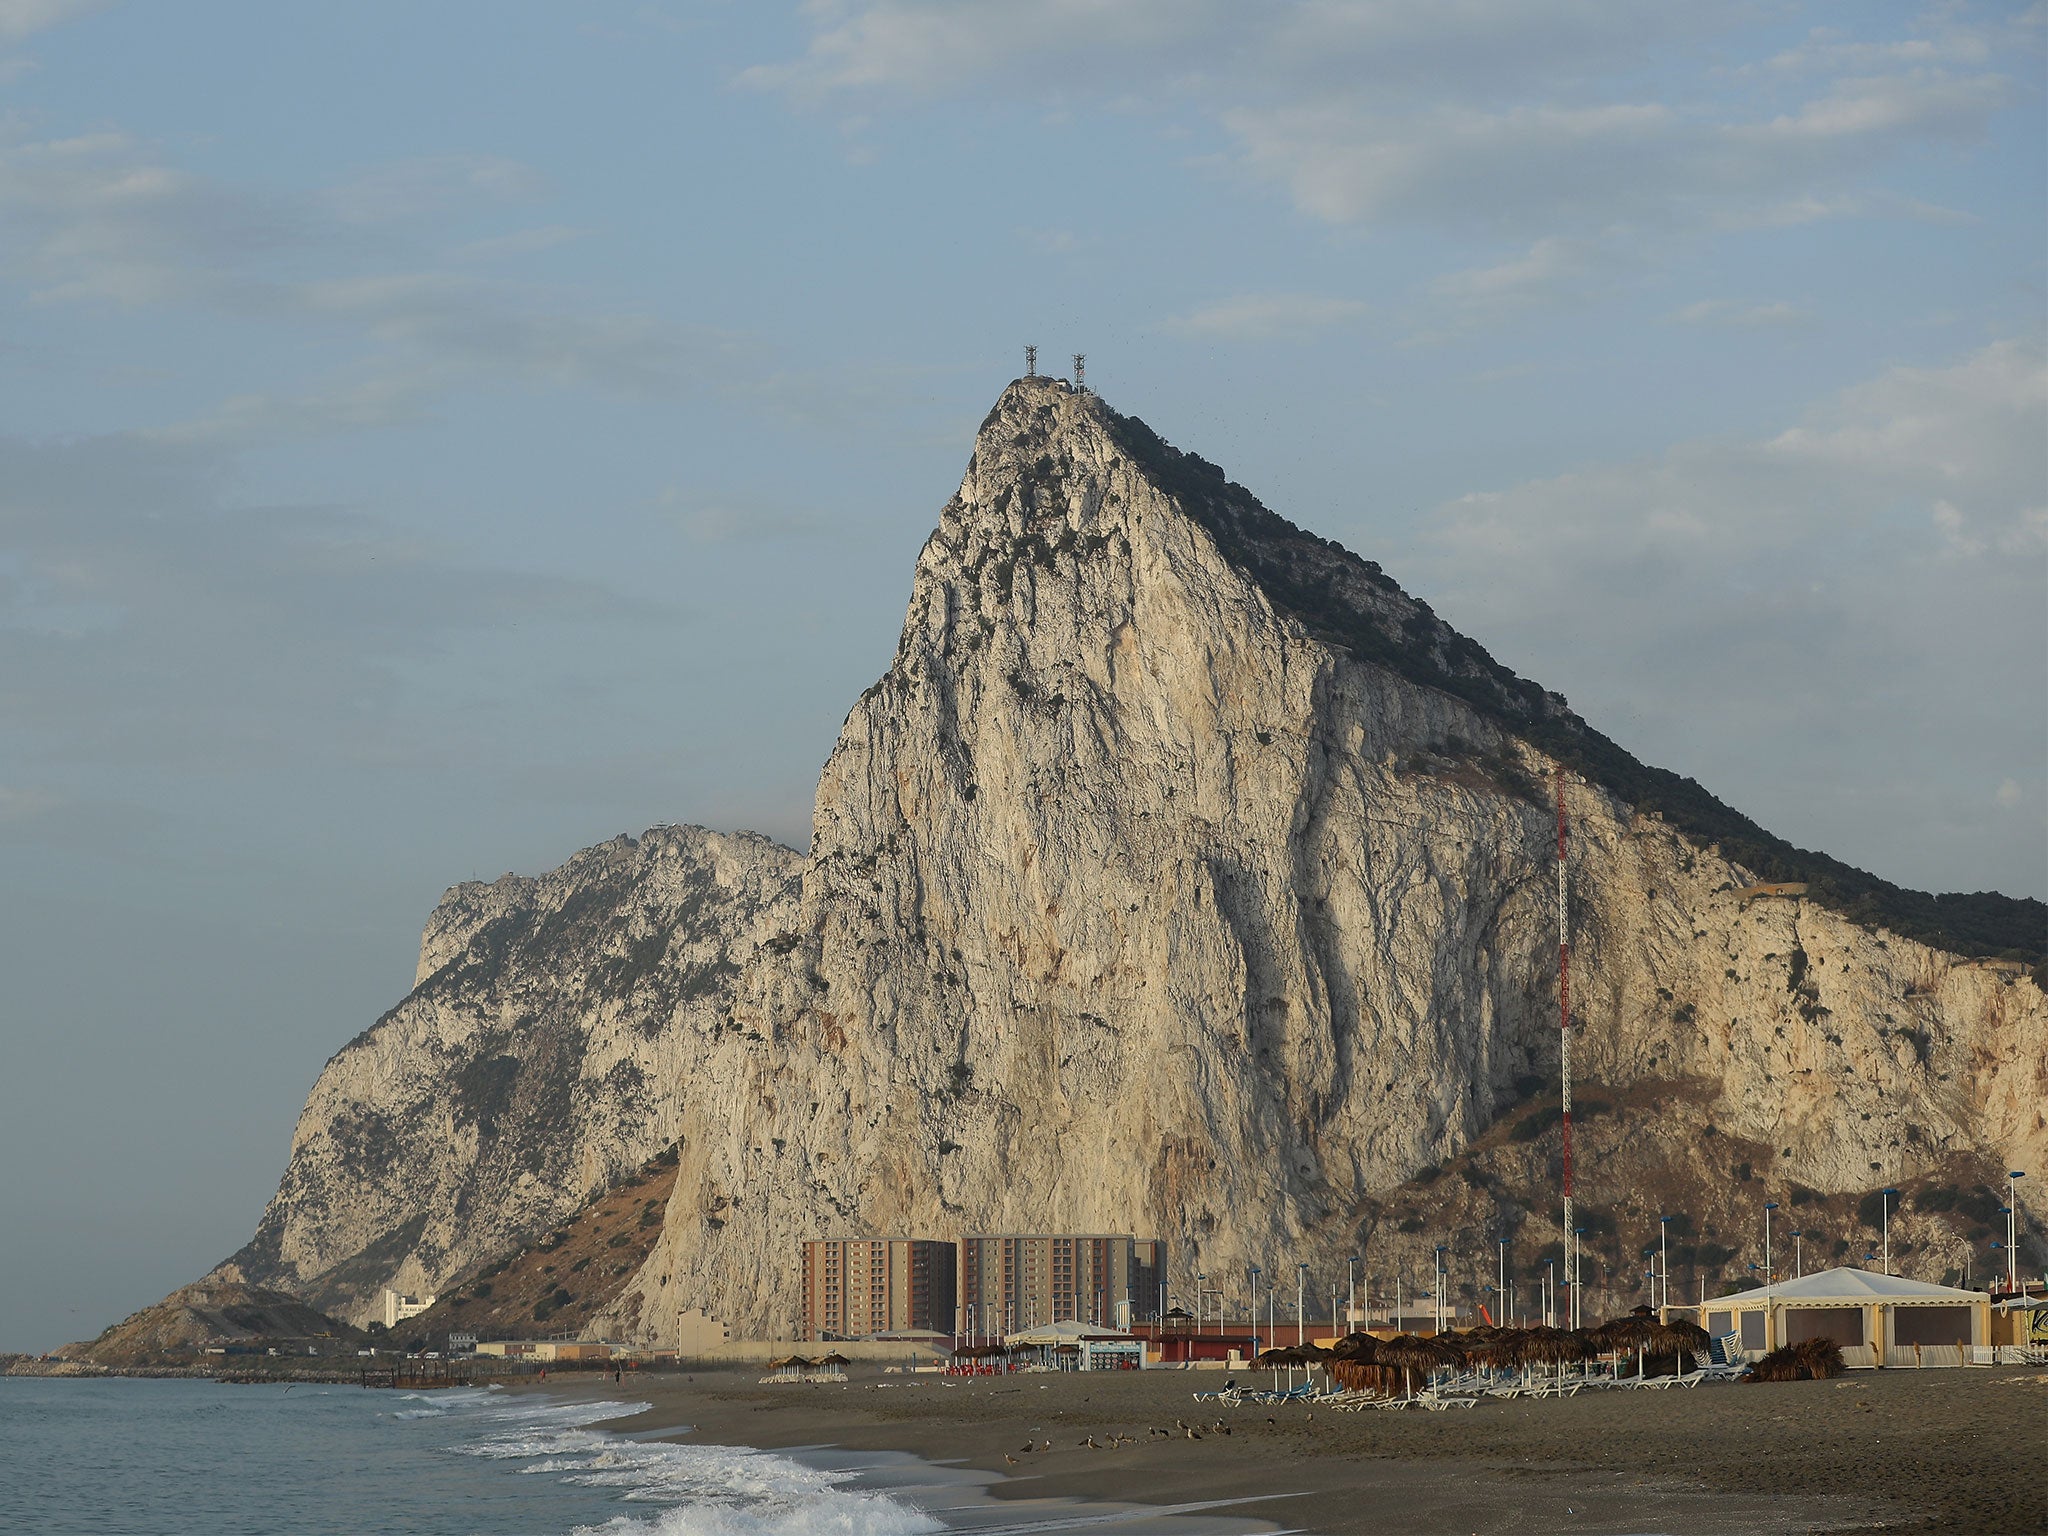 Spain has contested the UK's rule over the Rock for more than three centuries